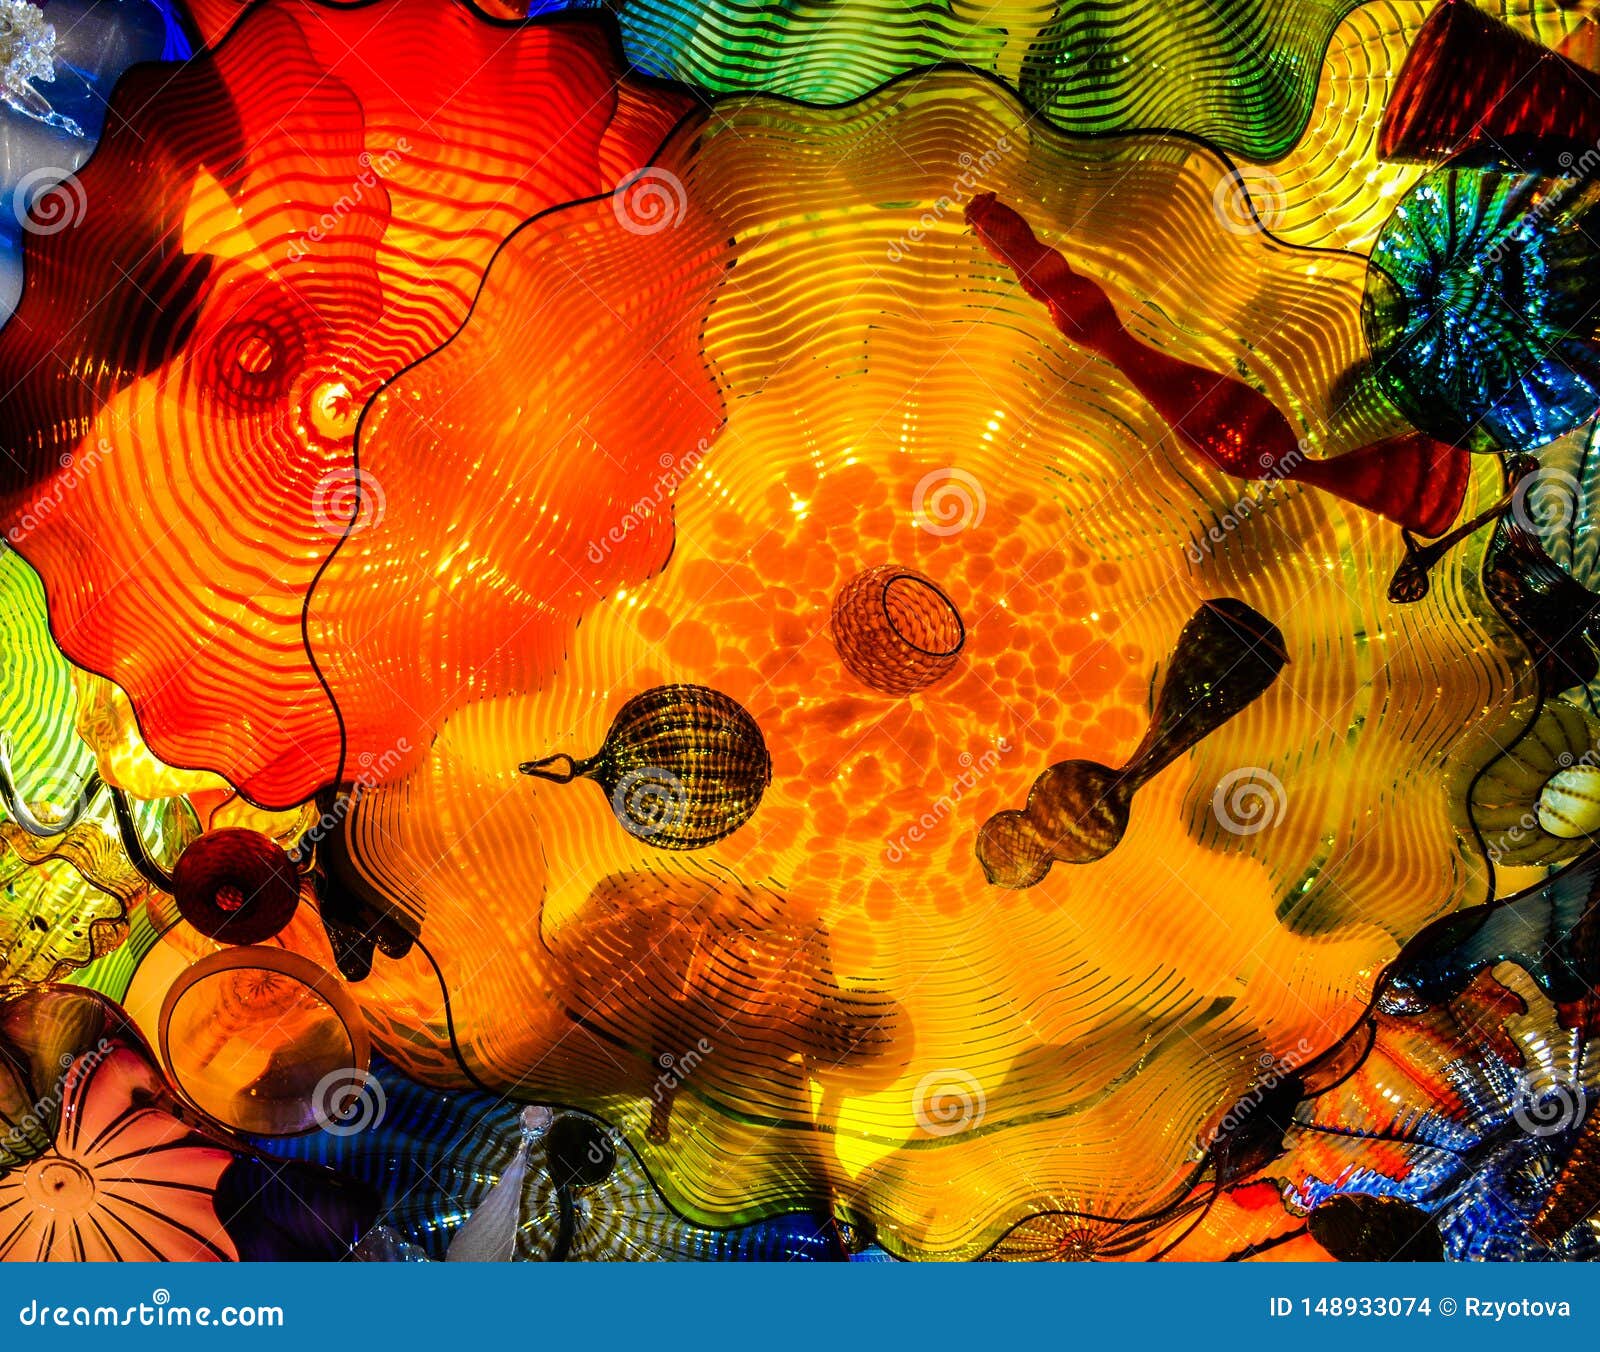 Persian Ceiling Chihuly Garden And Glass Stock Photo